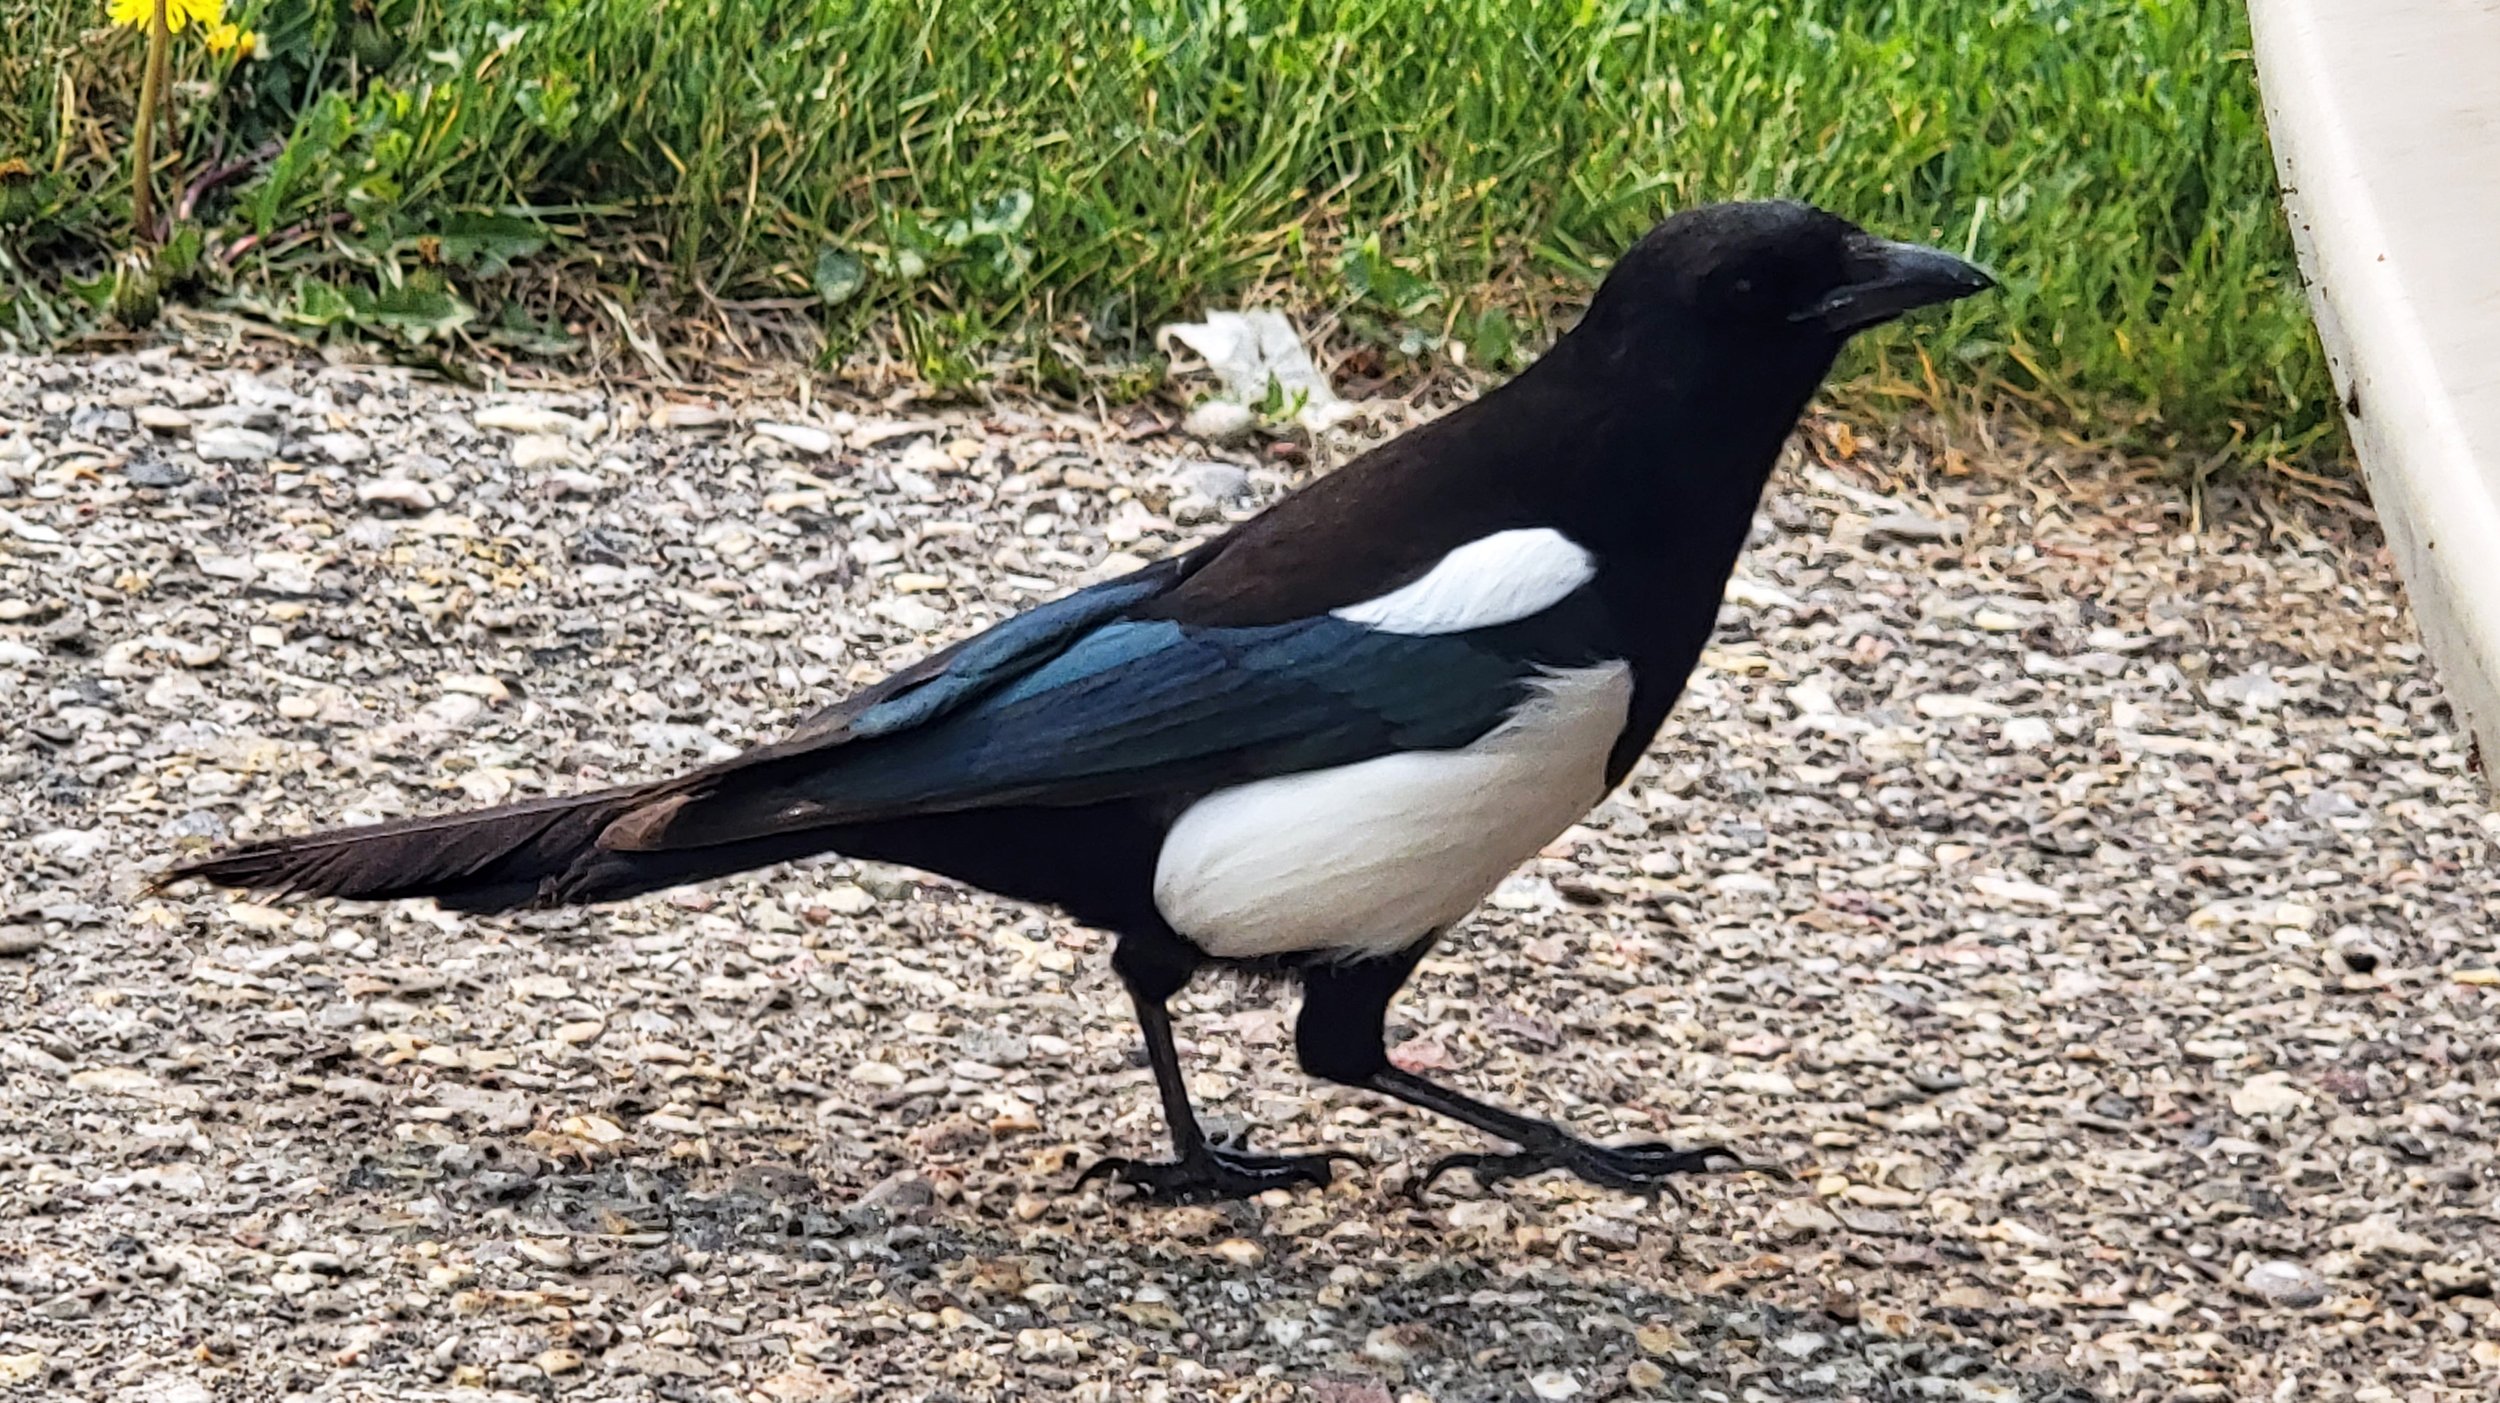 Lots of Magpies in the midwest. They're a very cool pigeon replacement.